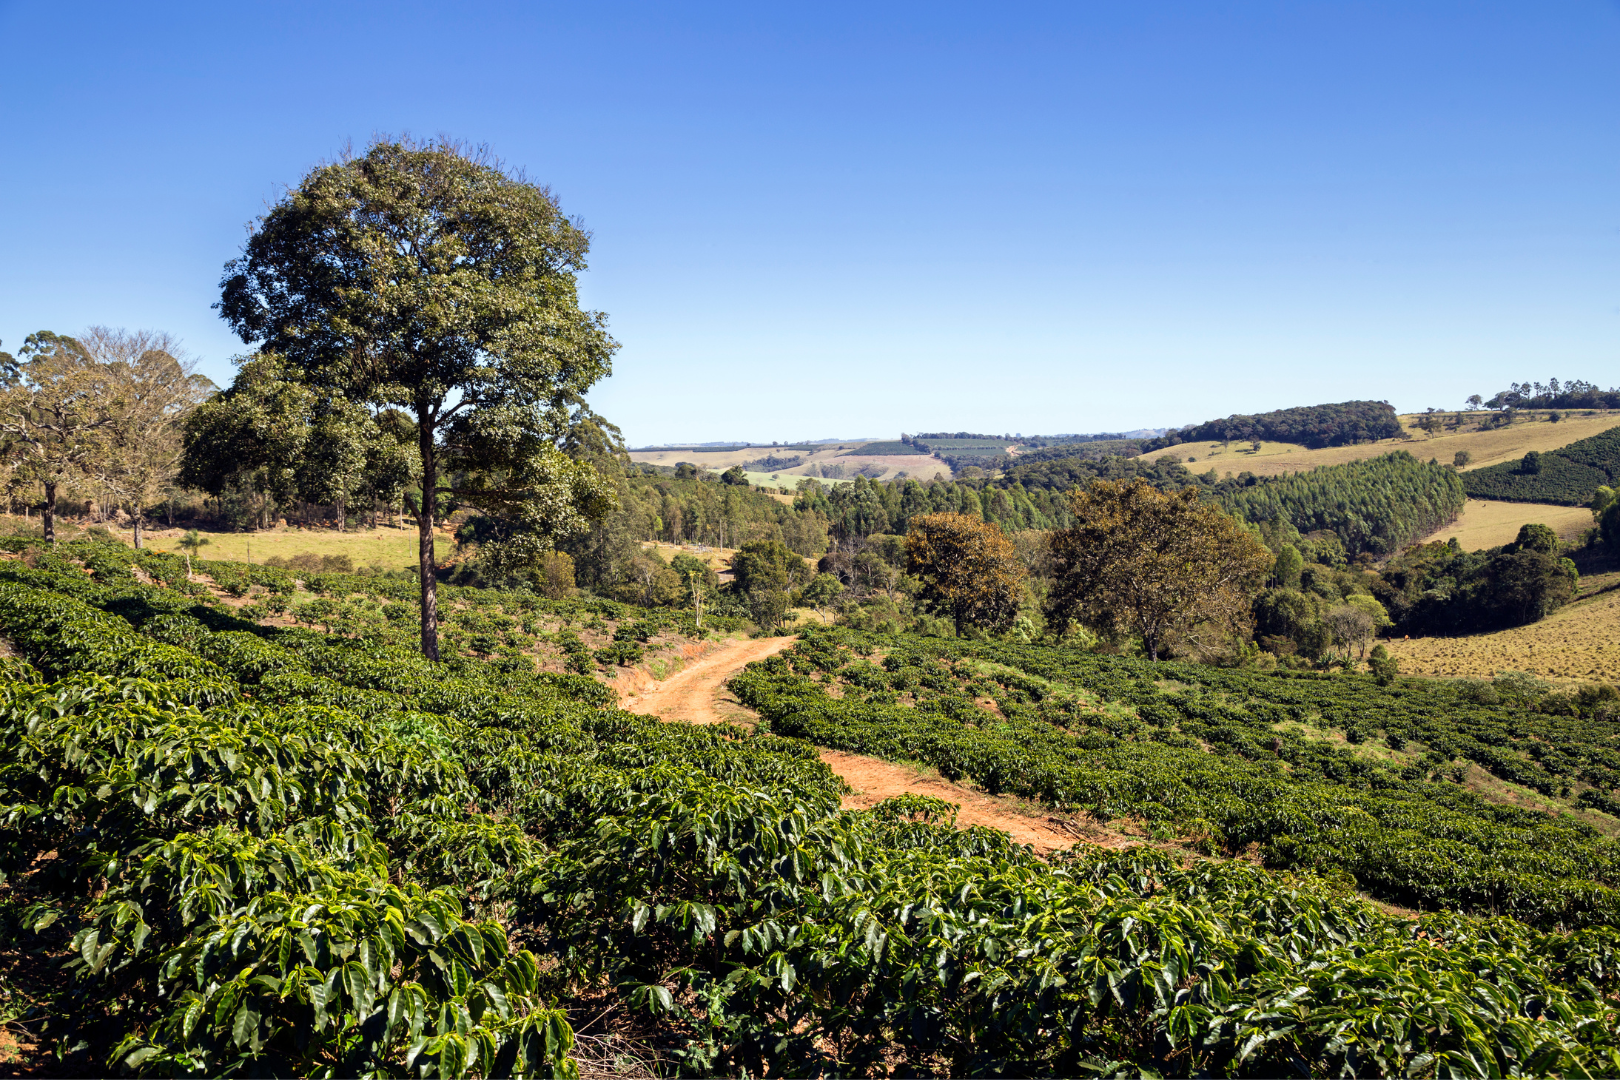 Minas Gerais, Brazil's top coffee producer, boasts towering mountains for optimal coffee cultivationMinas Gerais, Brazil's top coffee producer, boasts towering mountains for optimal coffee cultivation